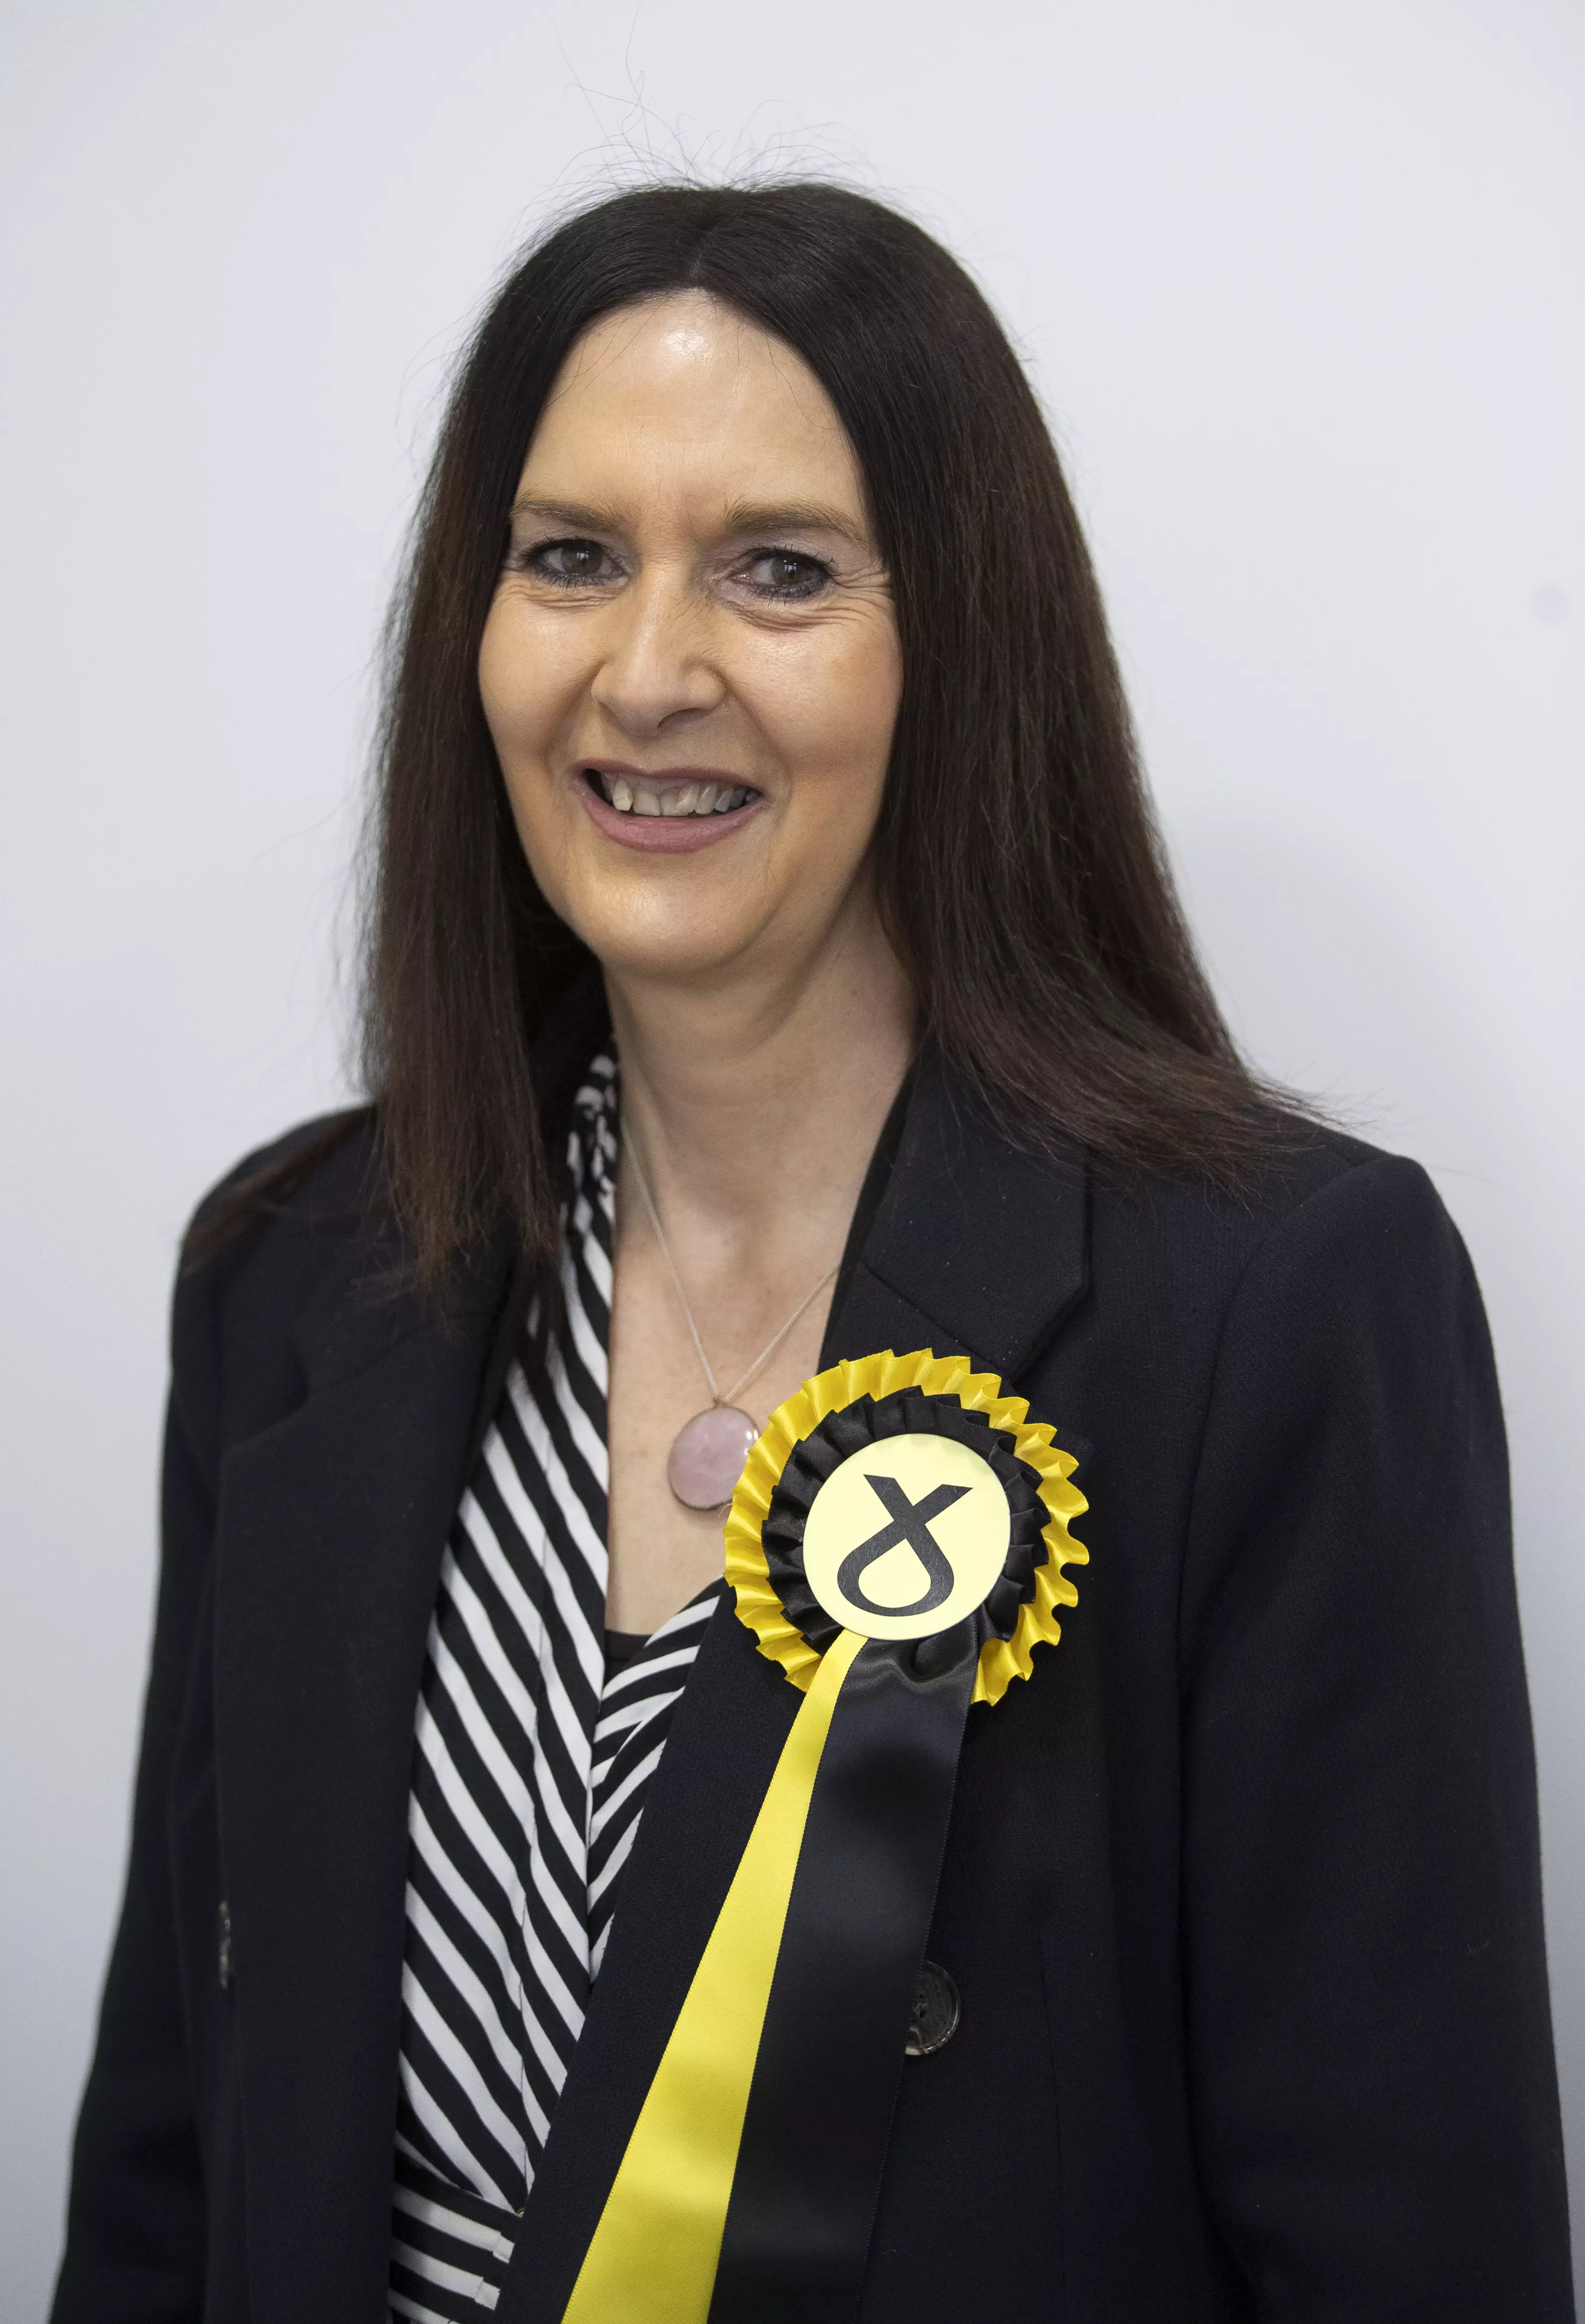 Ferrier is the MP for Rutherglen and Hamilton West.